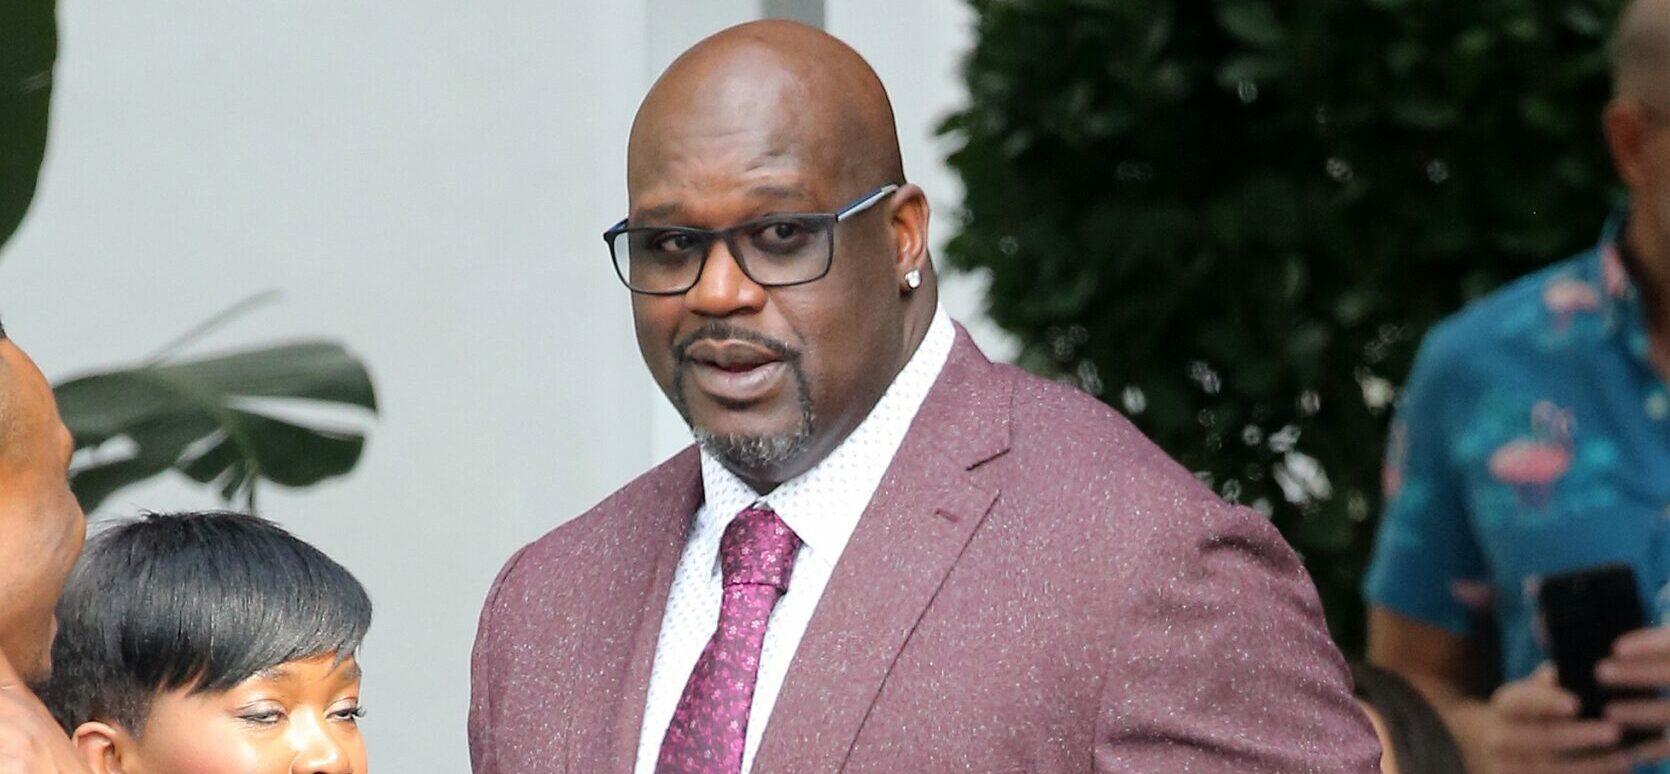 Grief Over Deaths of His Sister and Kobe Bryant Led Shaquille O’Neal to Gain 30 Pounds!